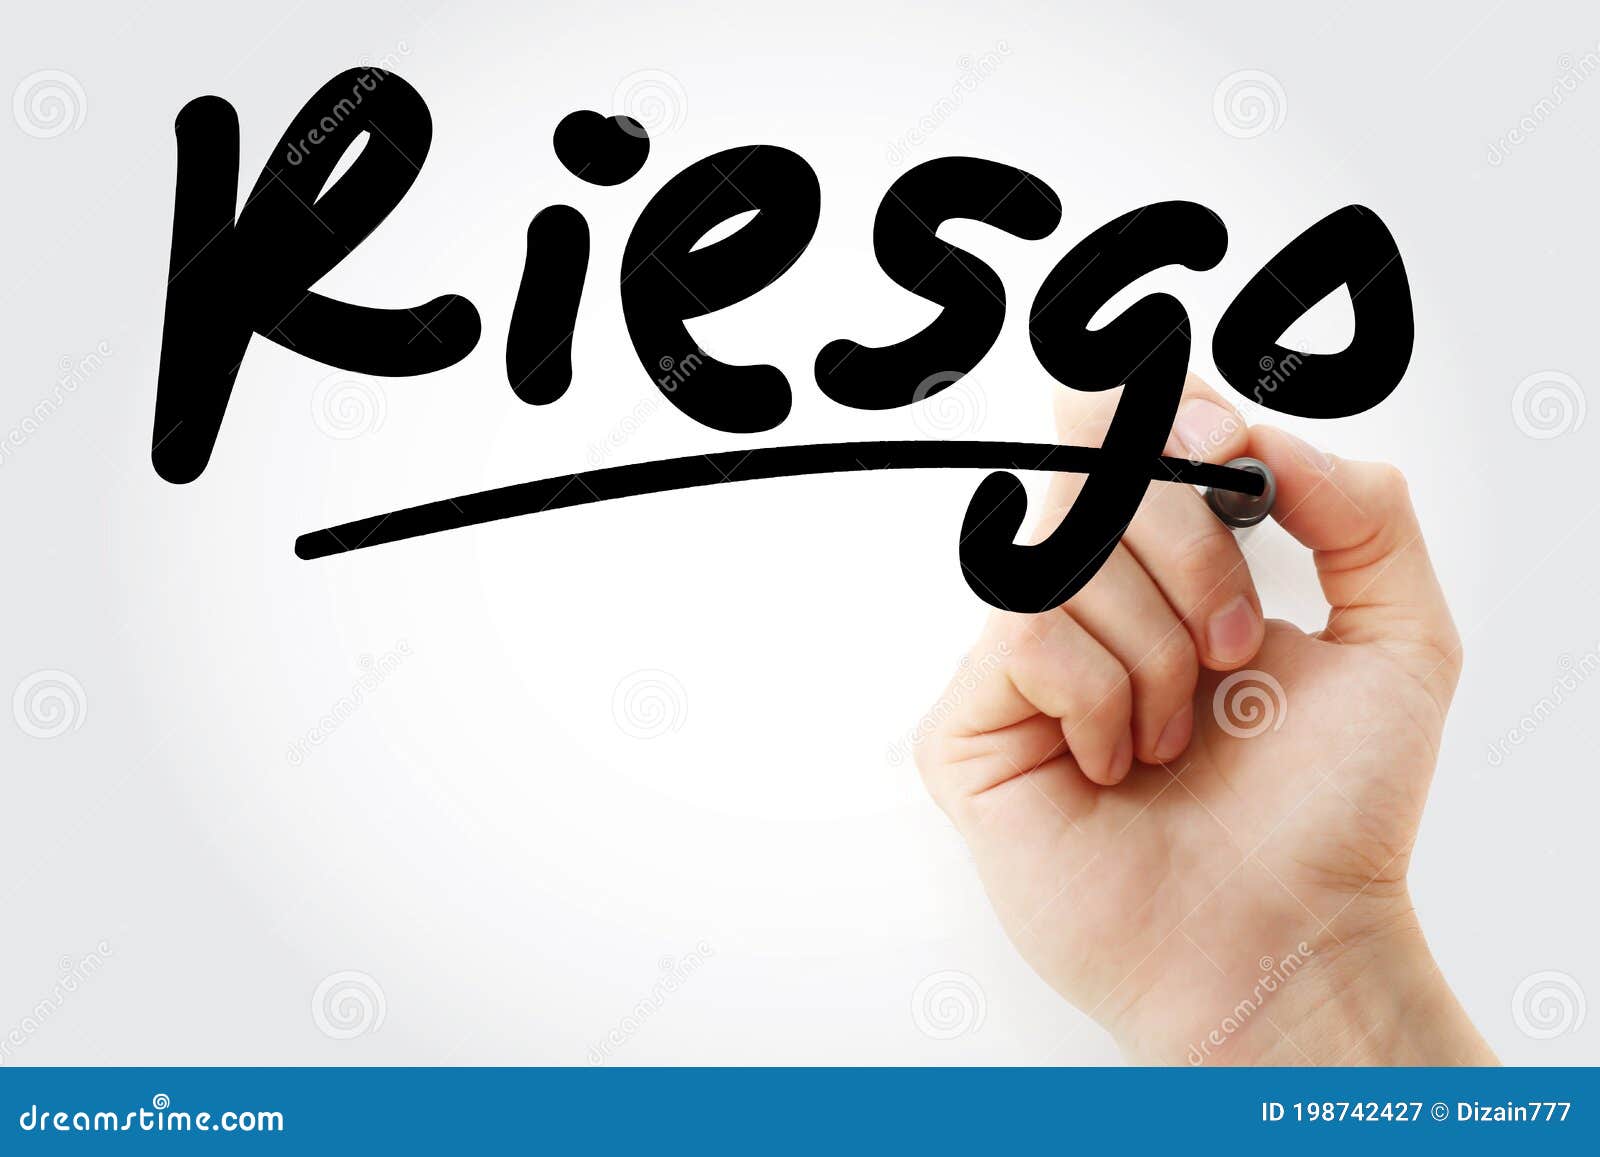 riesgo spanish words for risk text